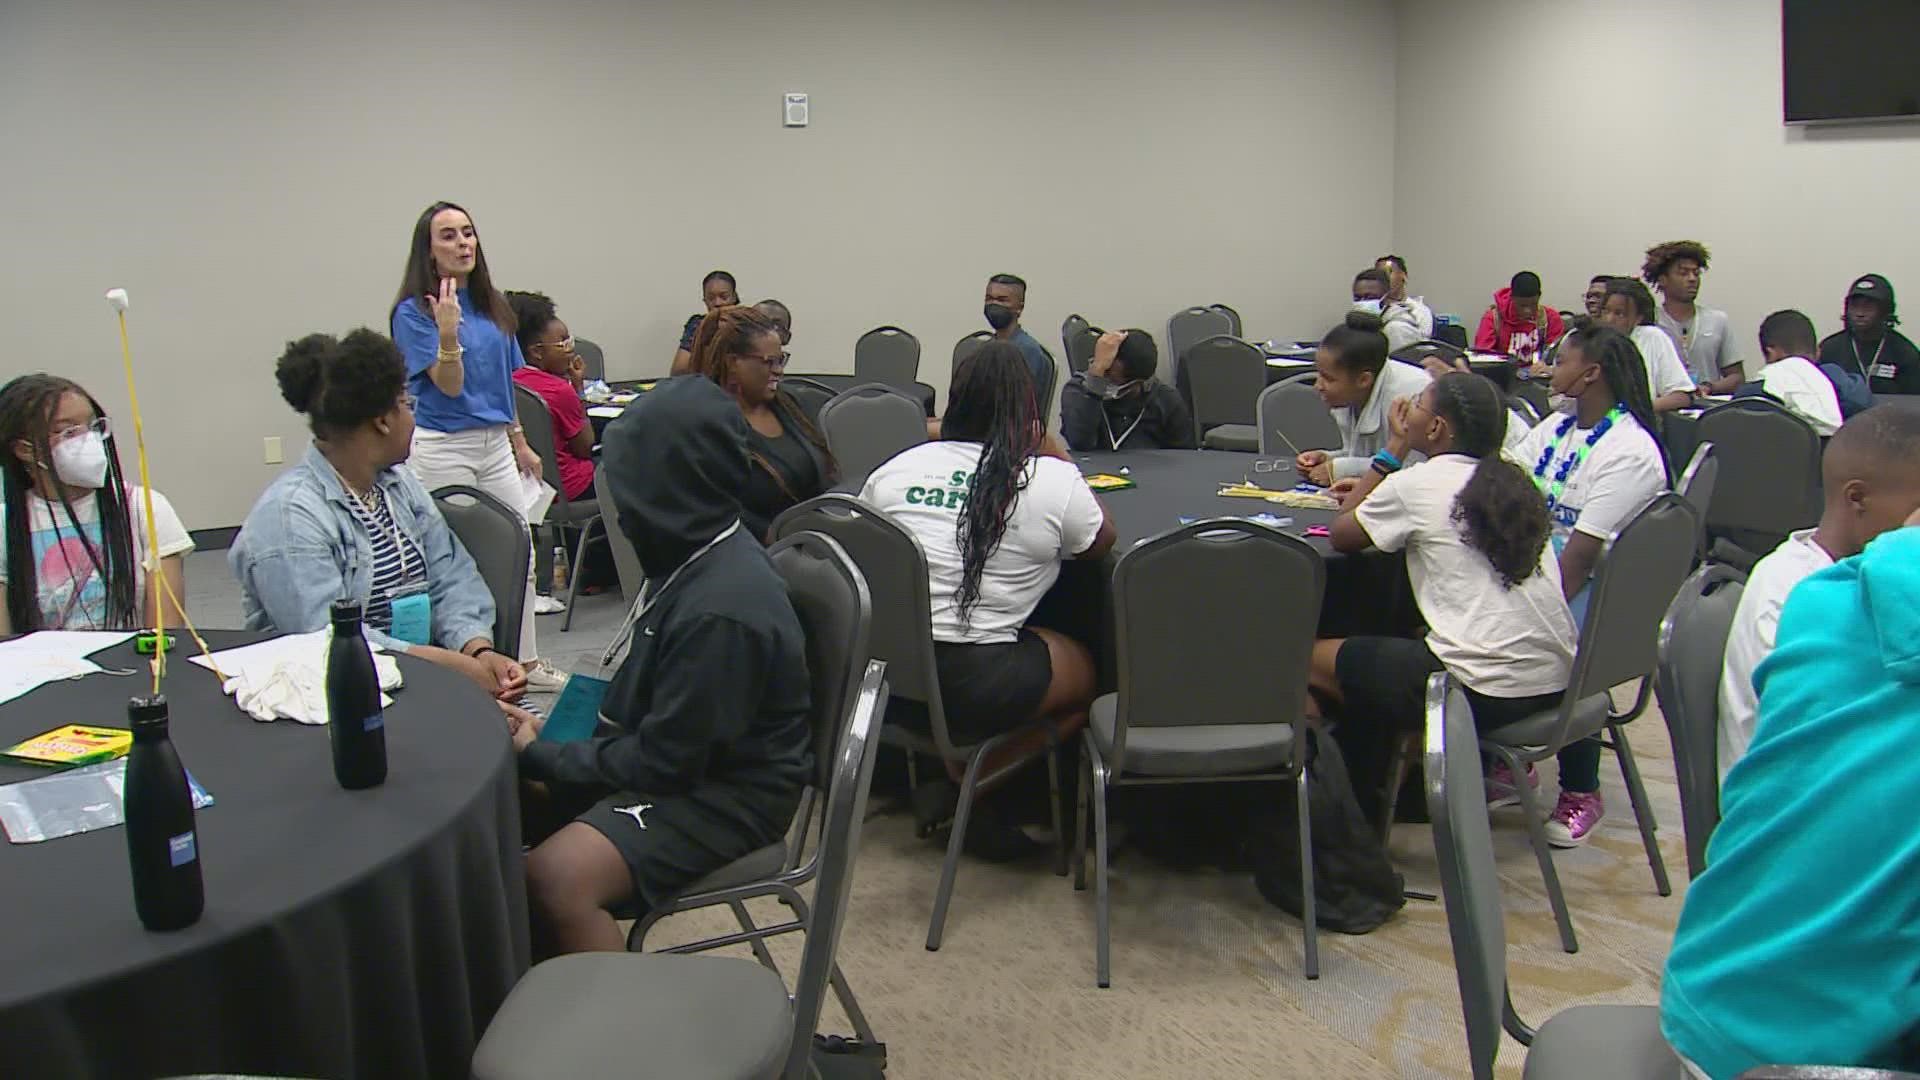 Students from all over DFW kicked off the Hackathon STEAM Academy 2022 on Monday.